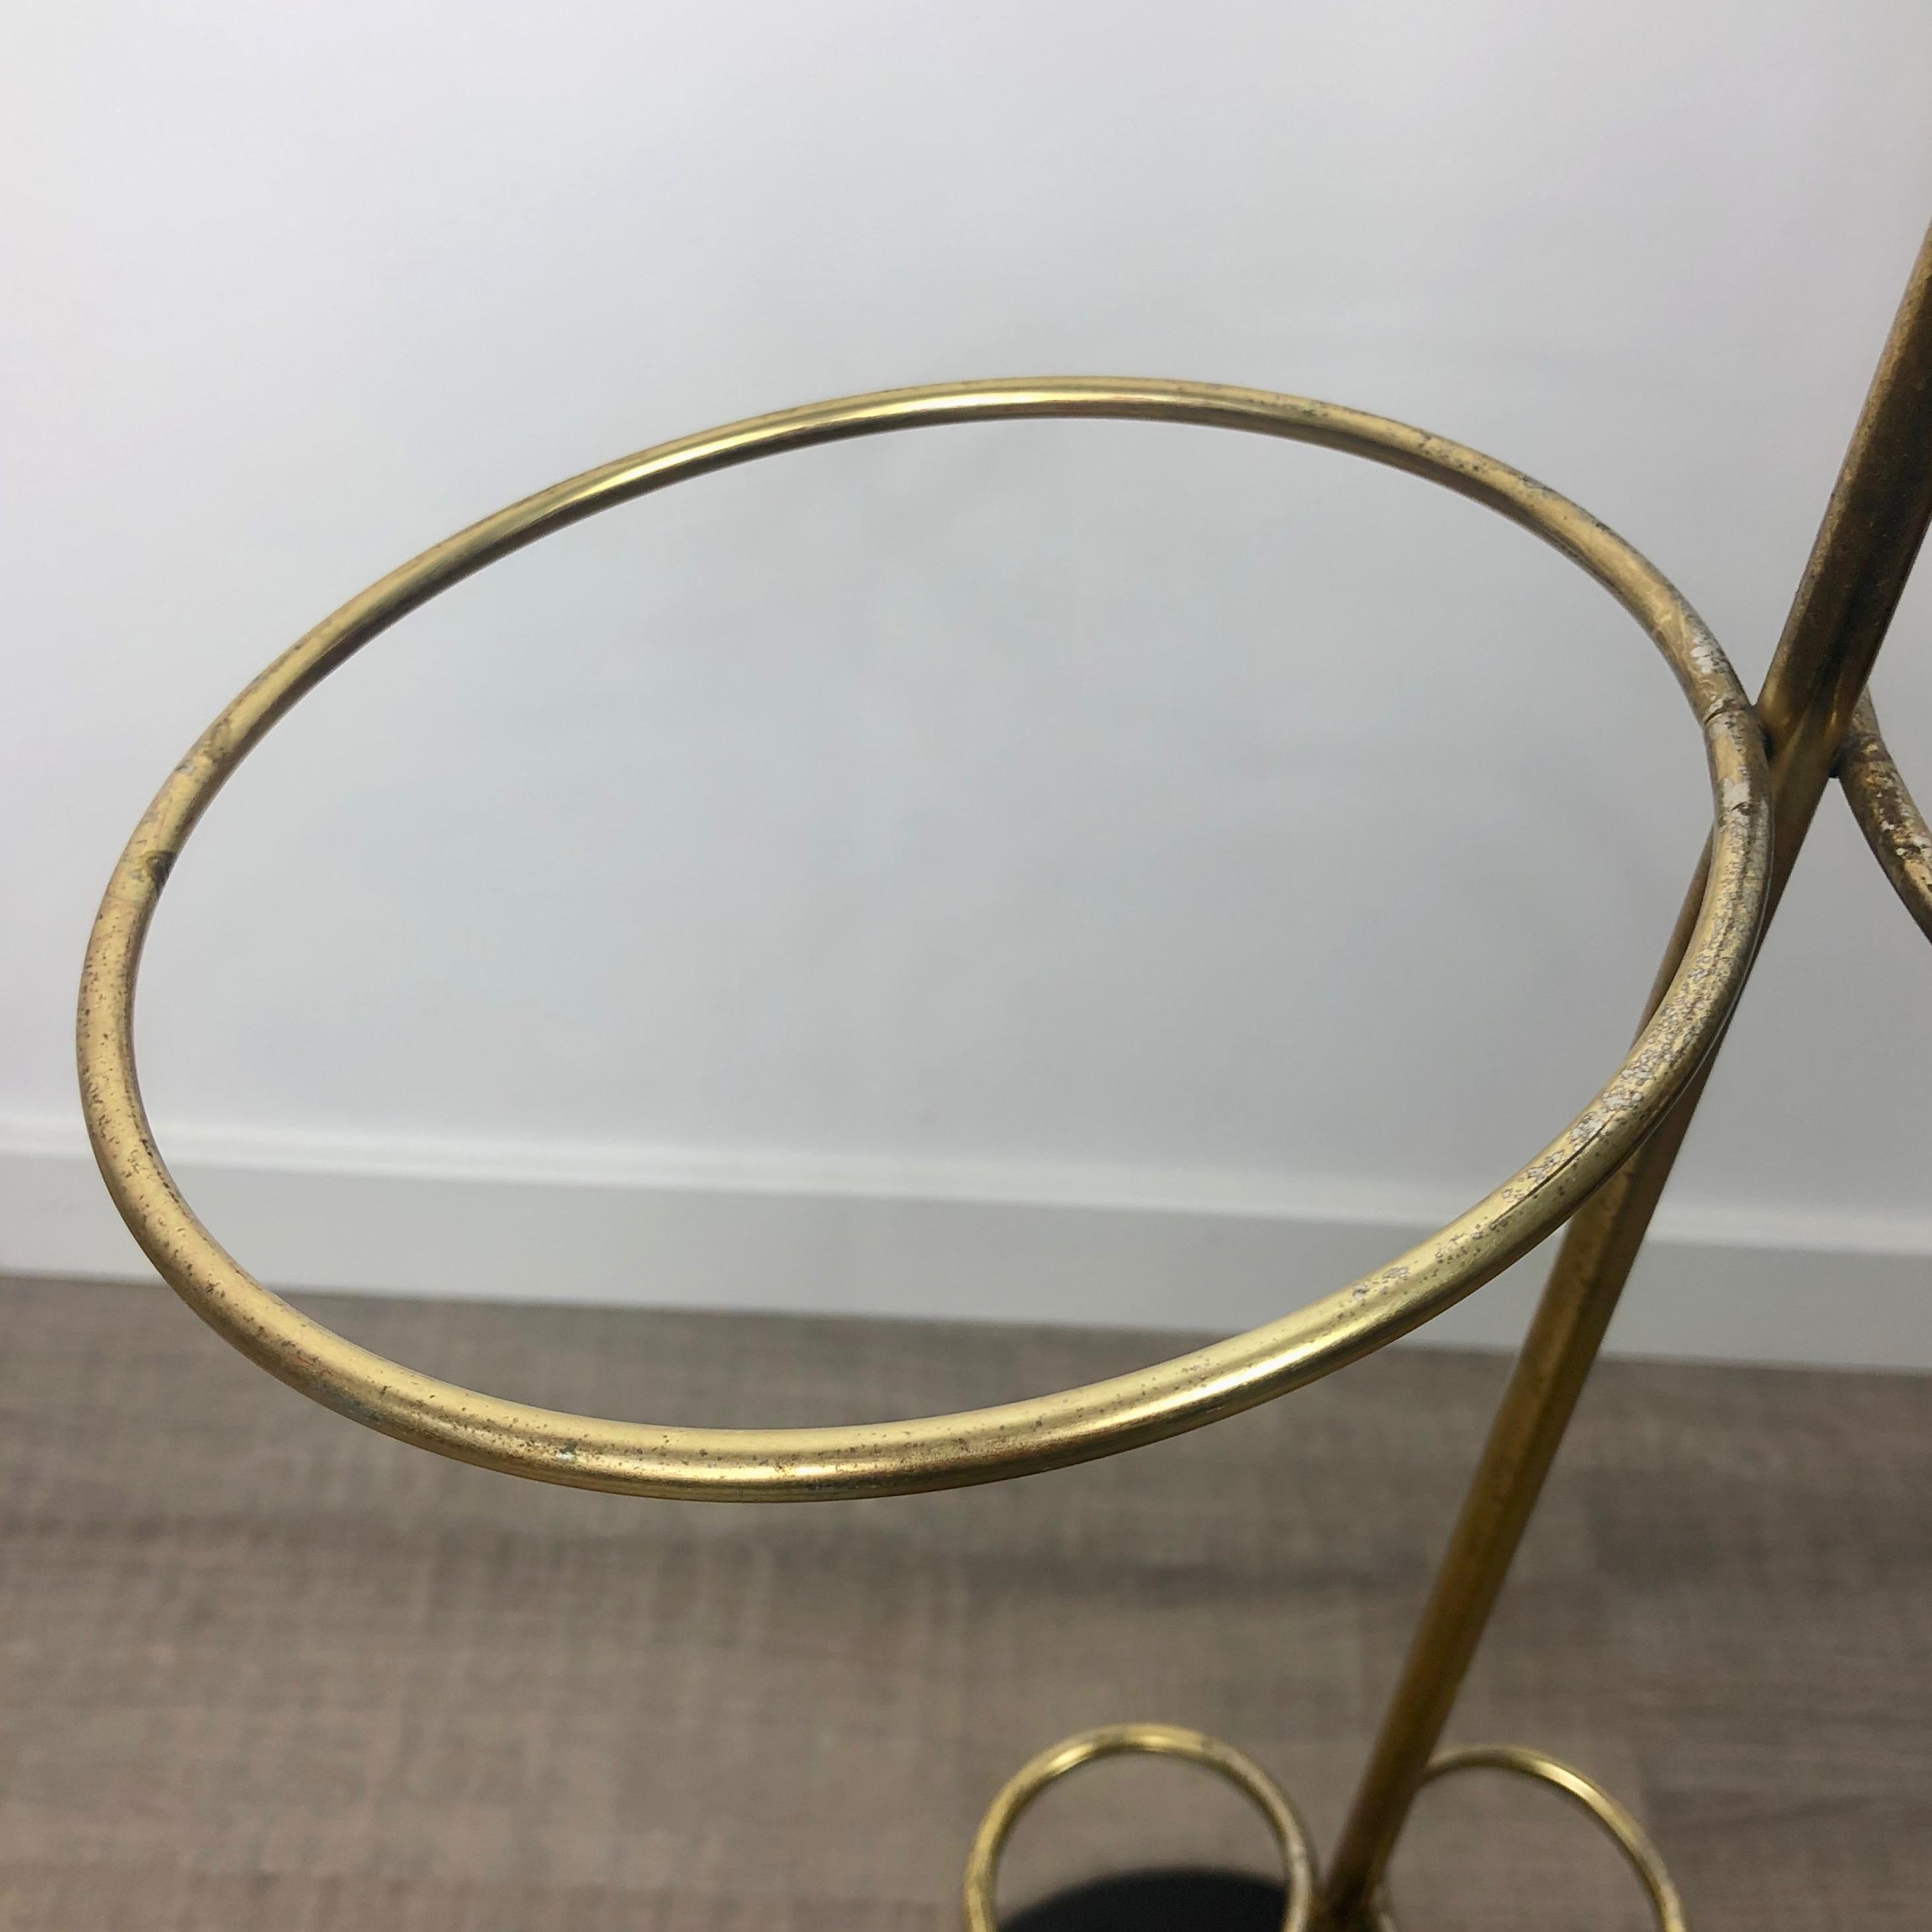 Red Cones Umbrella Stand Racket by Vitra in Metal and Brass, Italy, 1970s For Sale 3